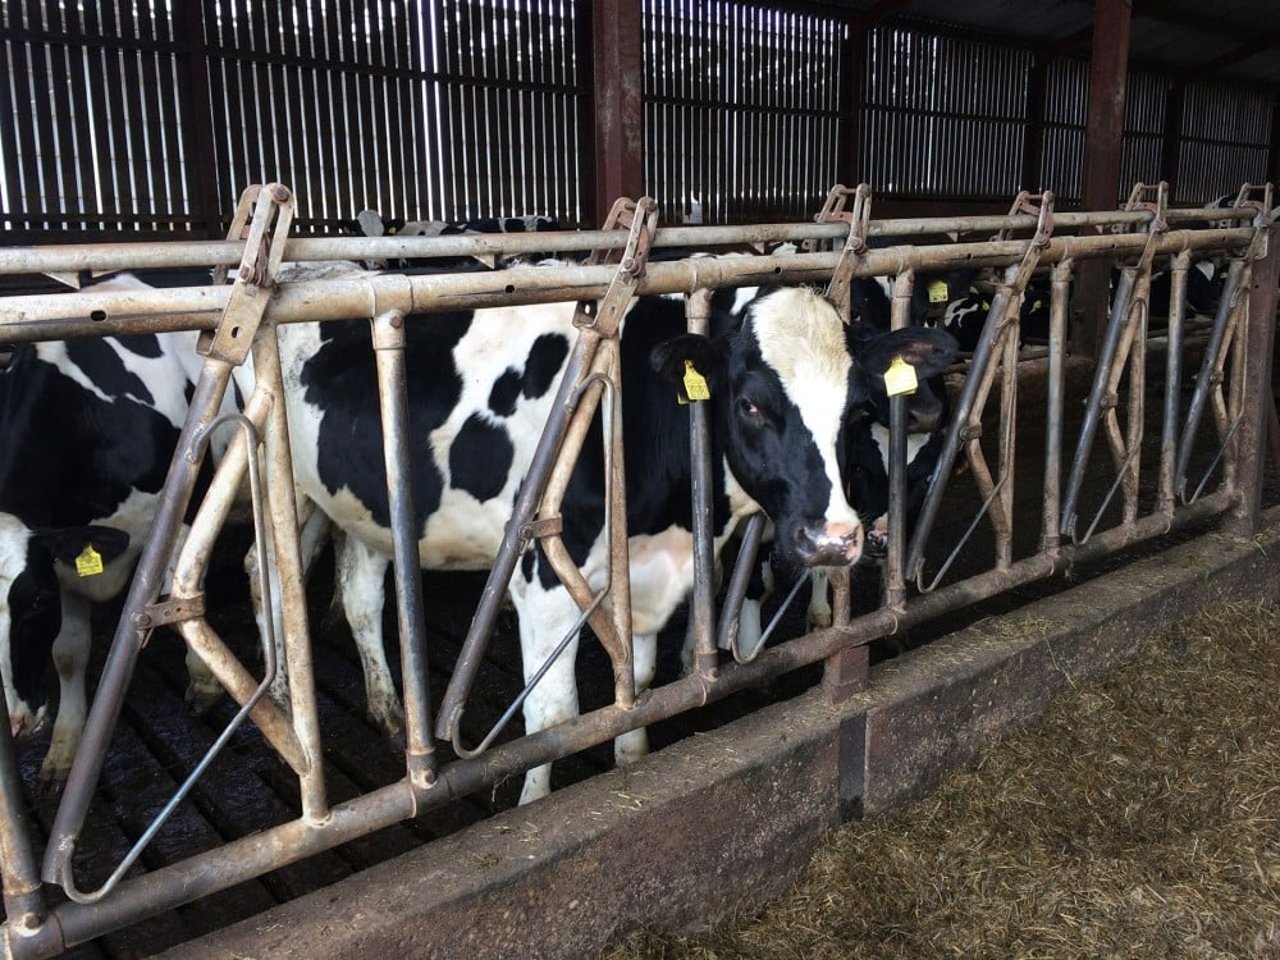 A cow looks at the camera that is confined to a small crate